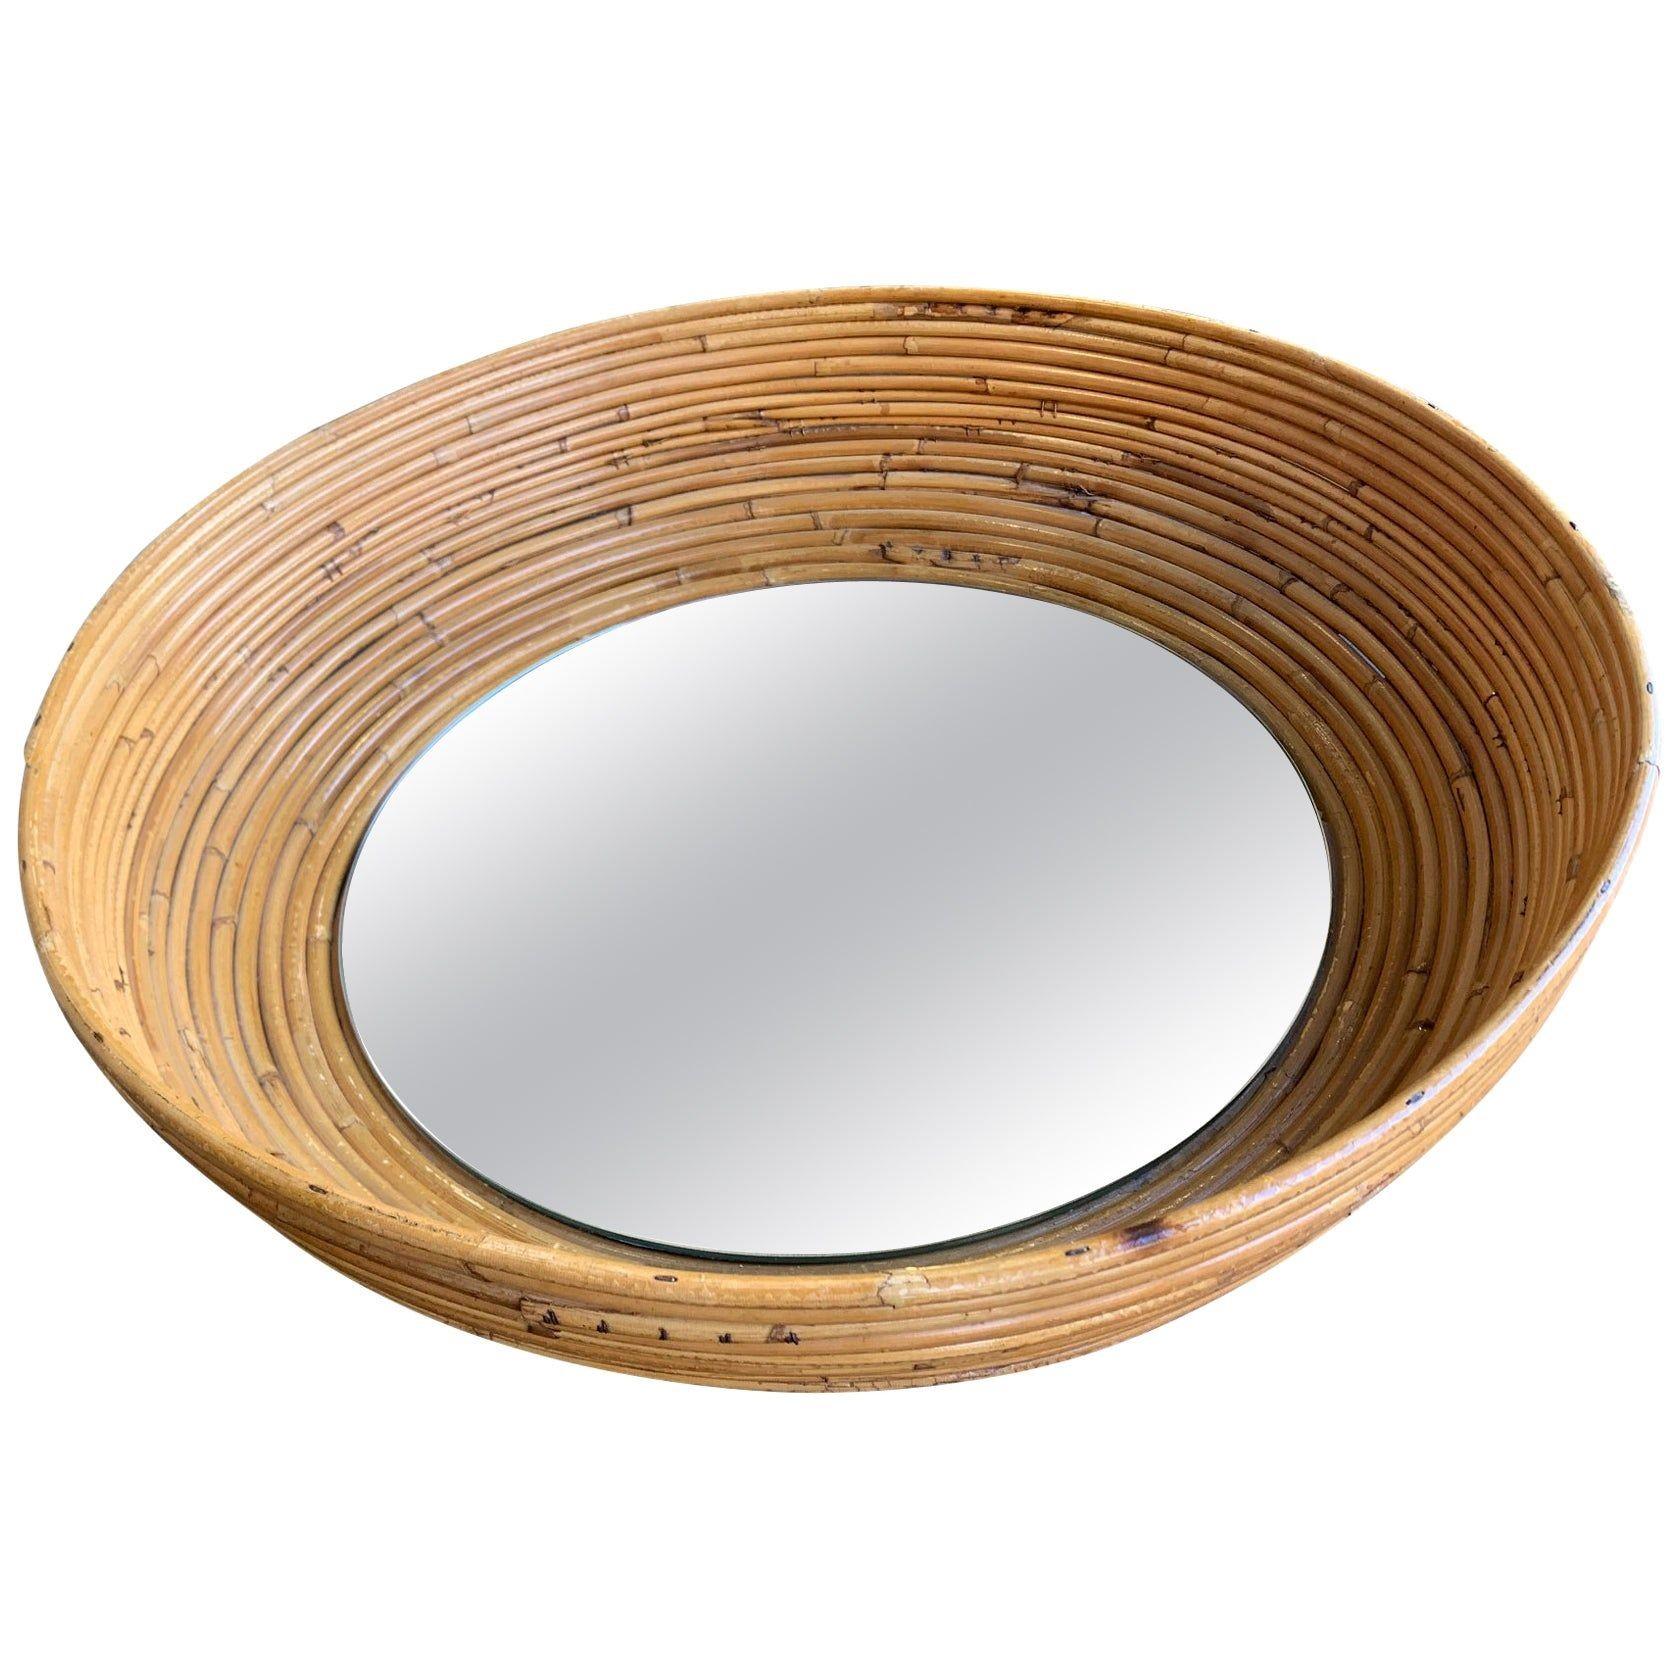 Mid-Century Modern 1960s French Riviera Circular Bowl Shaped Bamboo Mirror For Sale